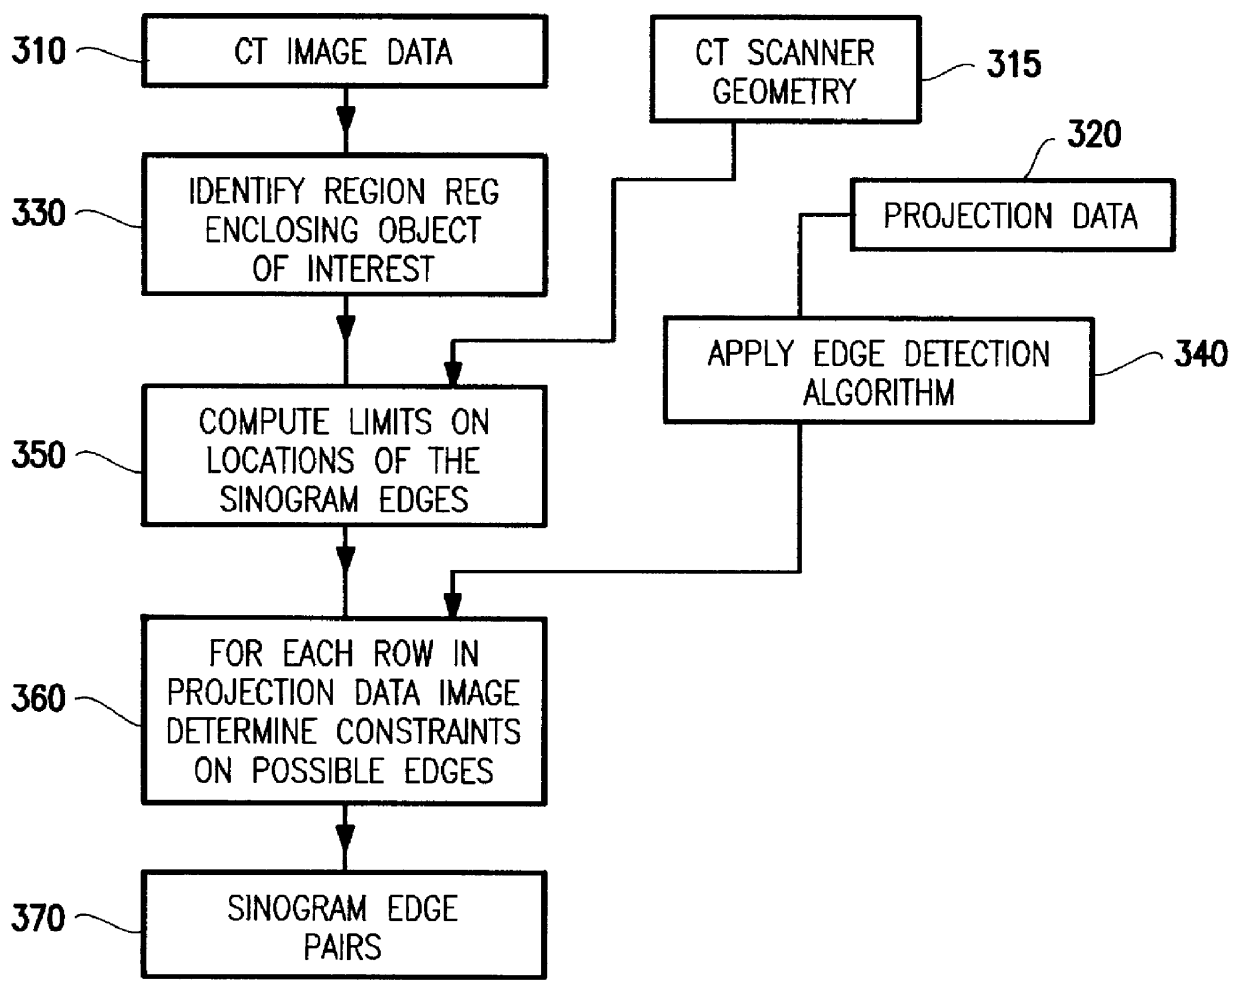 System and method for boundary detection in tomographic images by geometry-constrained edge detection of projected data